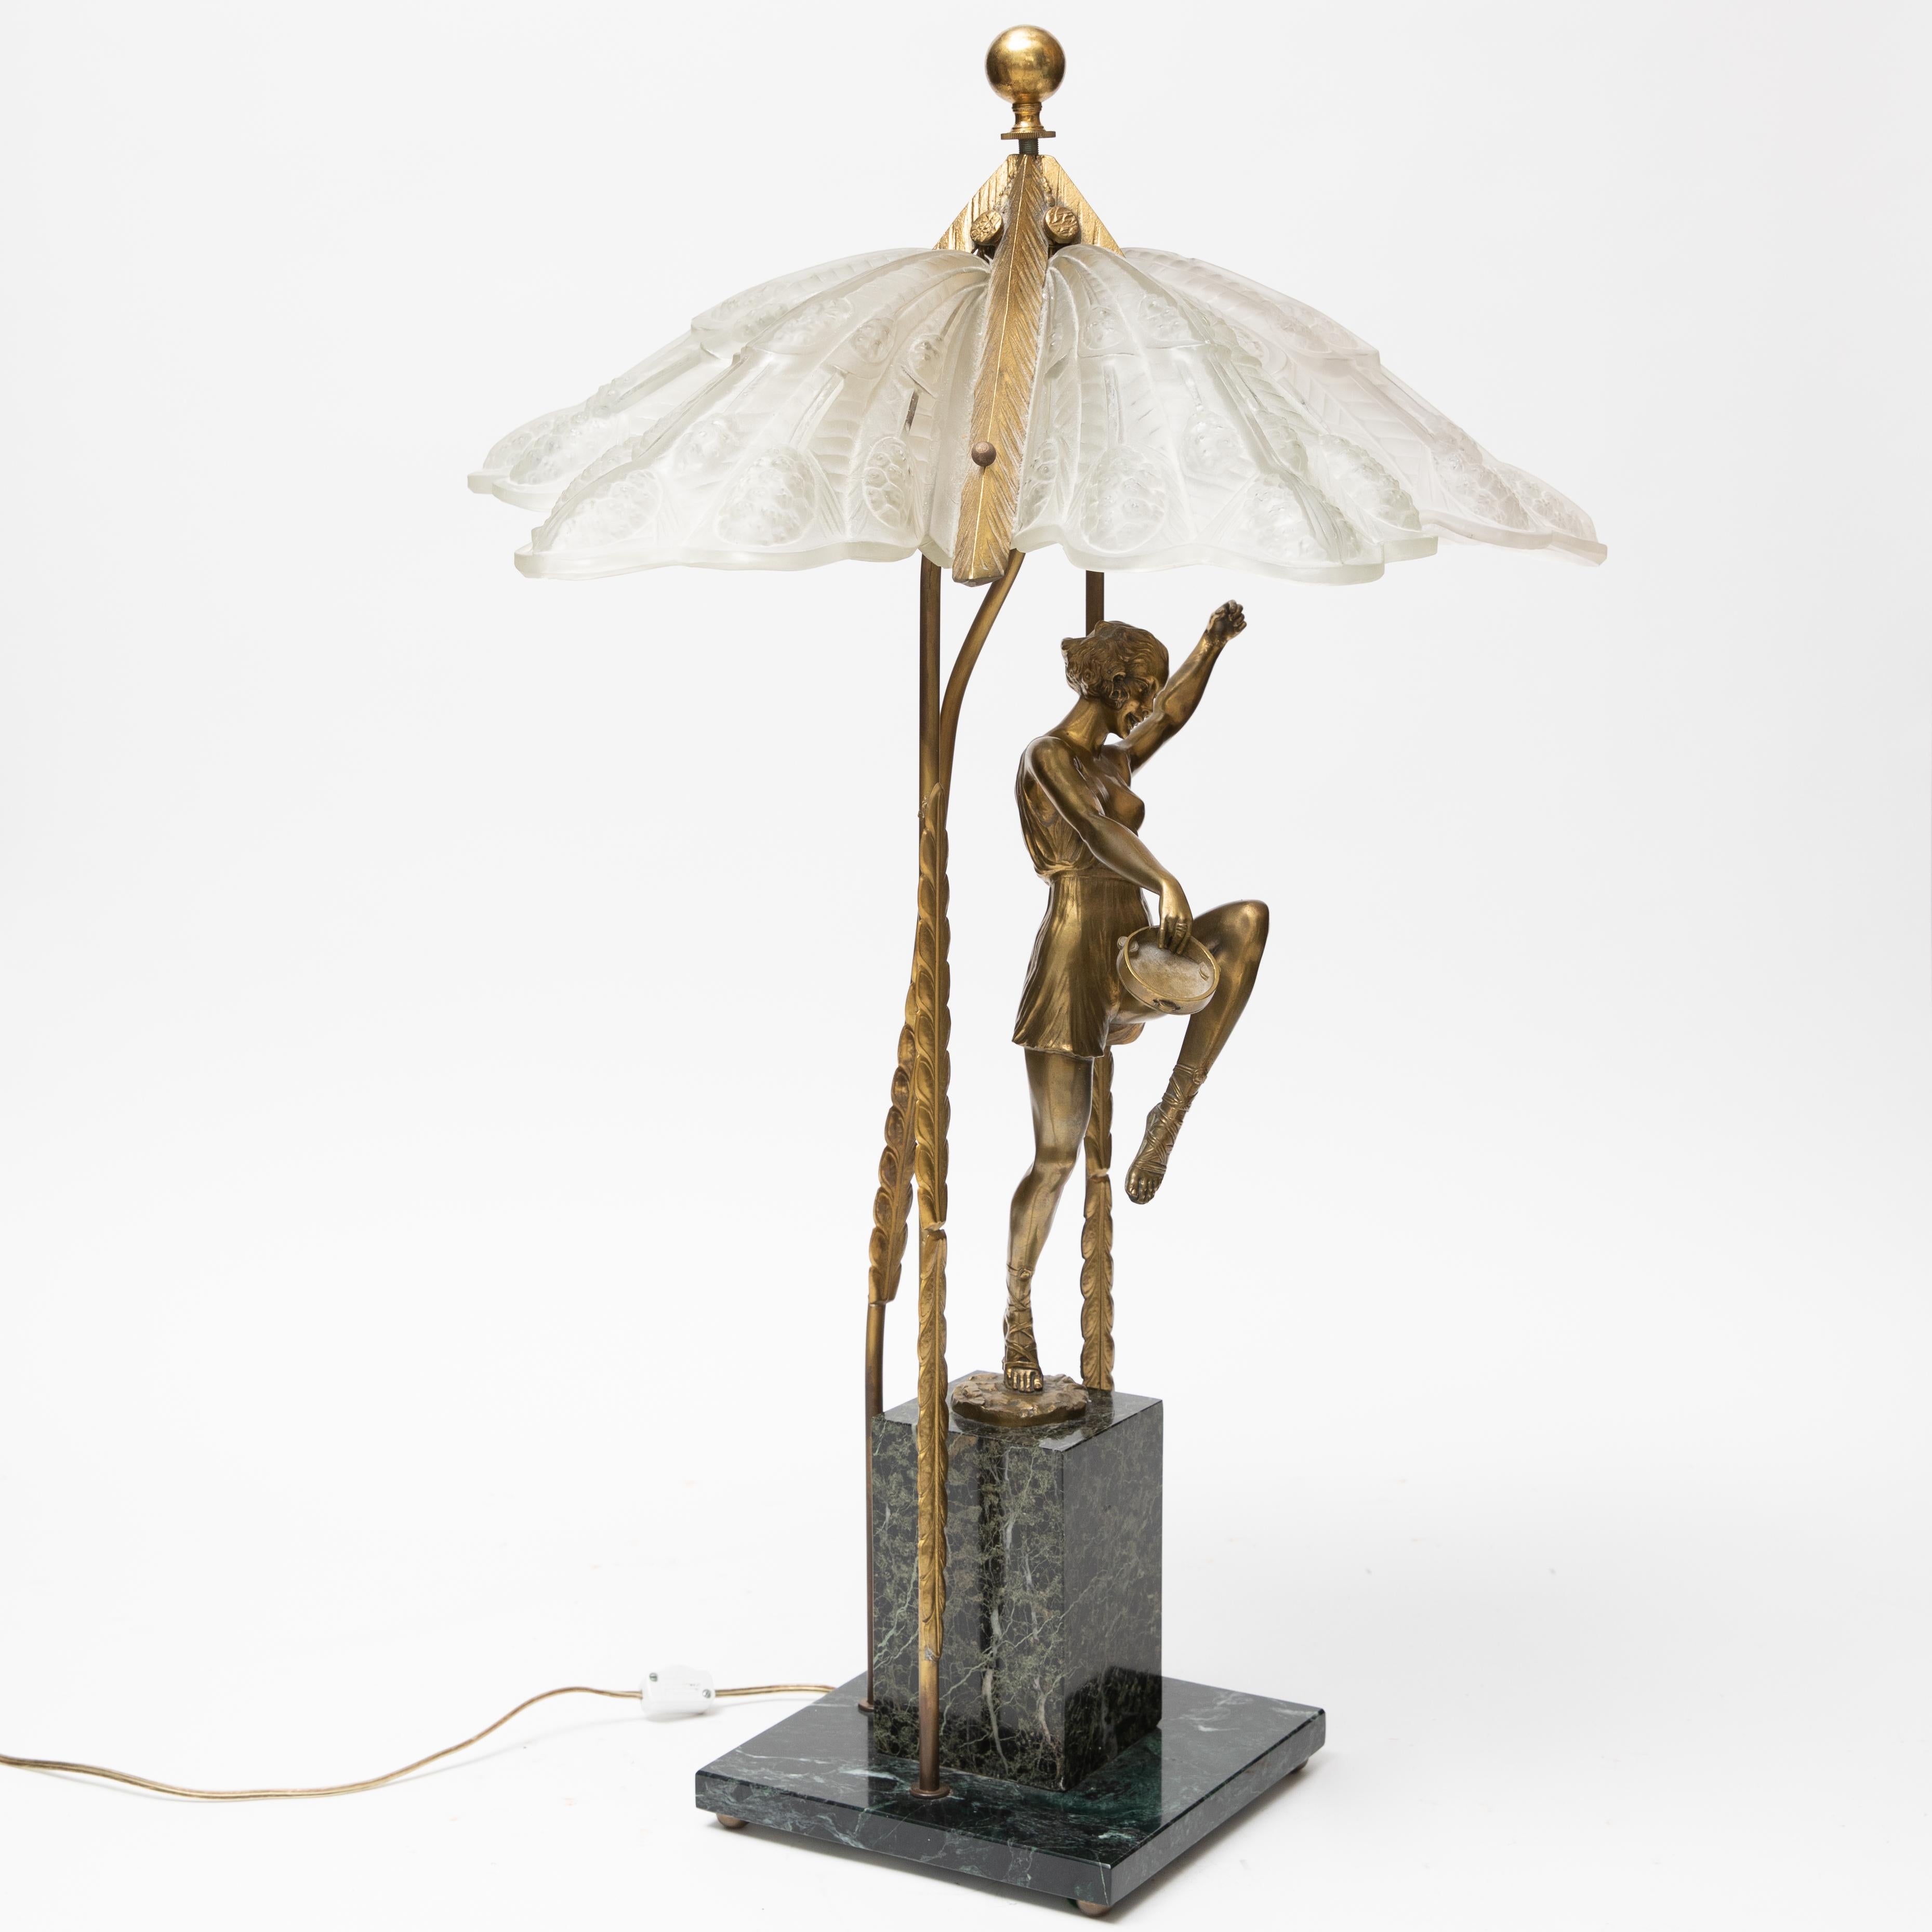 Tall Art Deco brass and frosted glass lamp. This lamps depicts a dancer holding a tambourine in her right hand. The glass shade resembles Lalique in style and is all held together with brass fittings on top of a marble base. This lamp measures 33.5